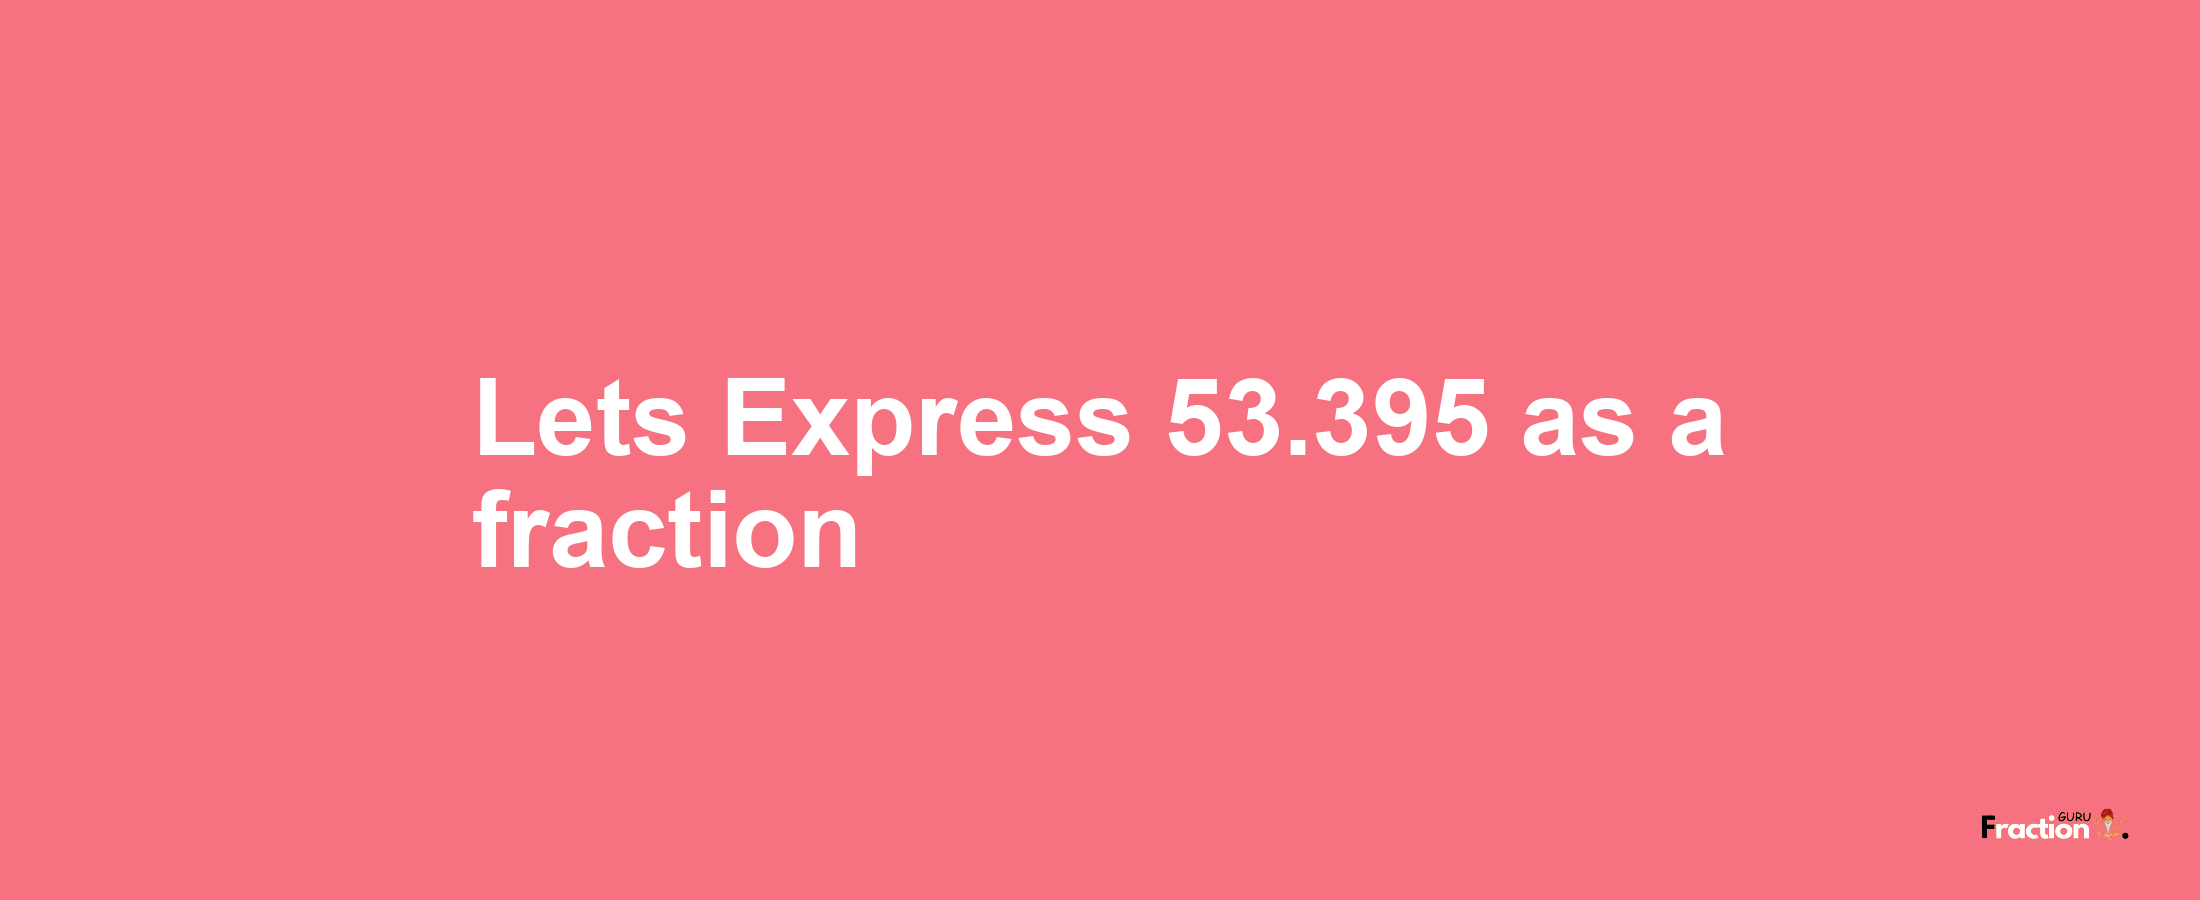 Lets Express 53.395 as afraction